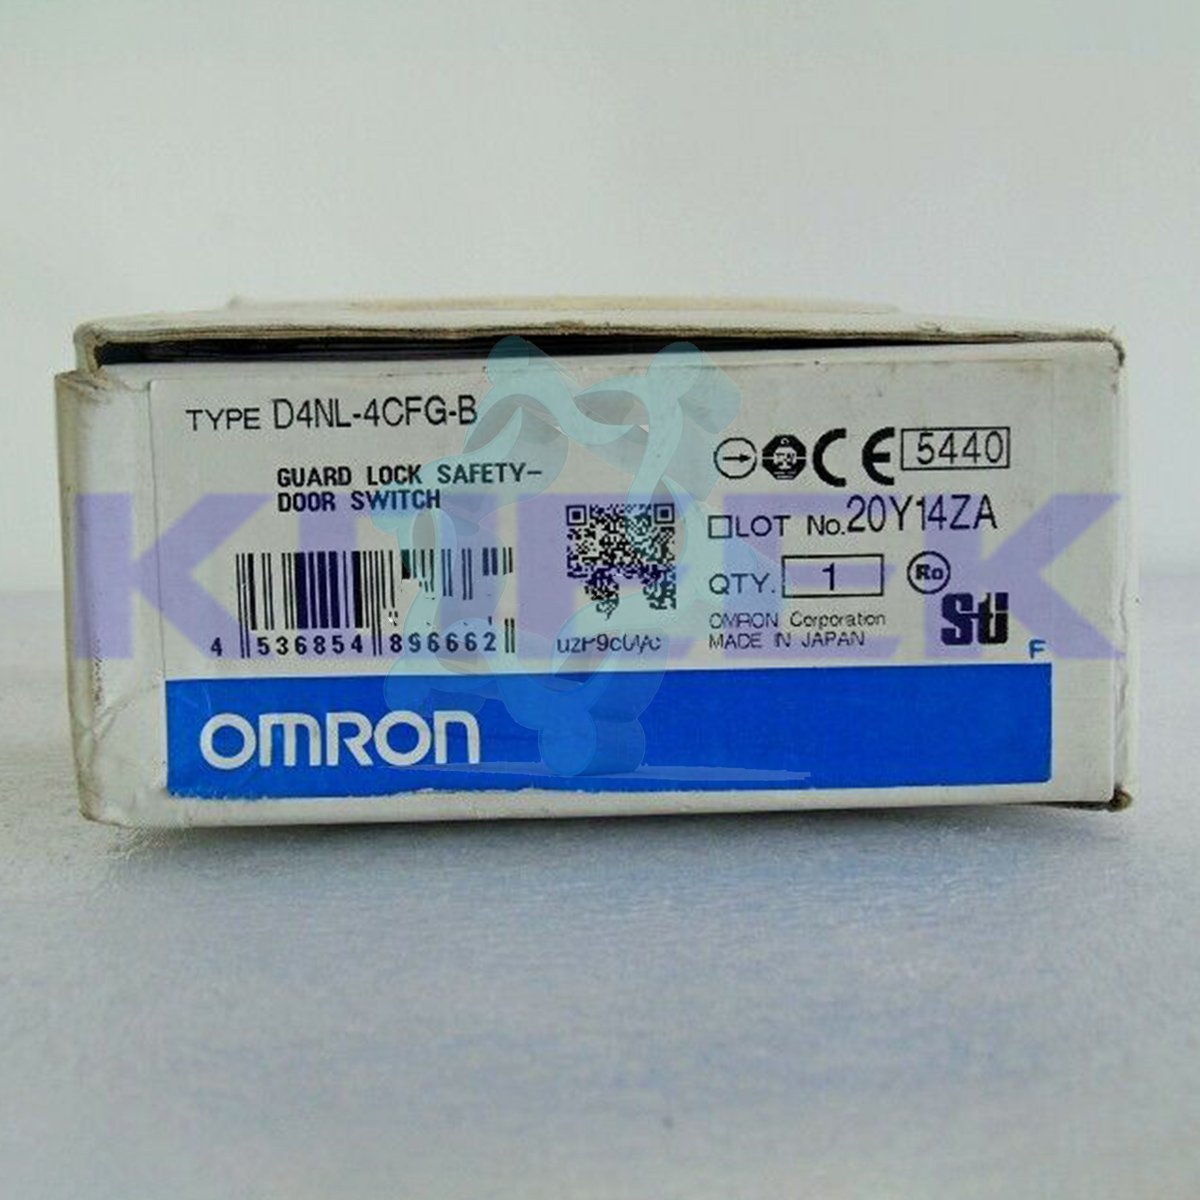 D4NL-4CFG-B KOEED 101-200, 80%, import_2020_10_10_031751, Omron, Other